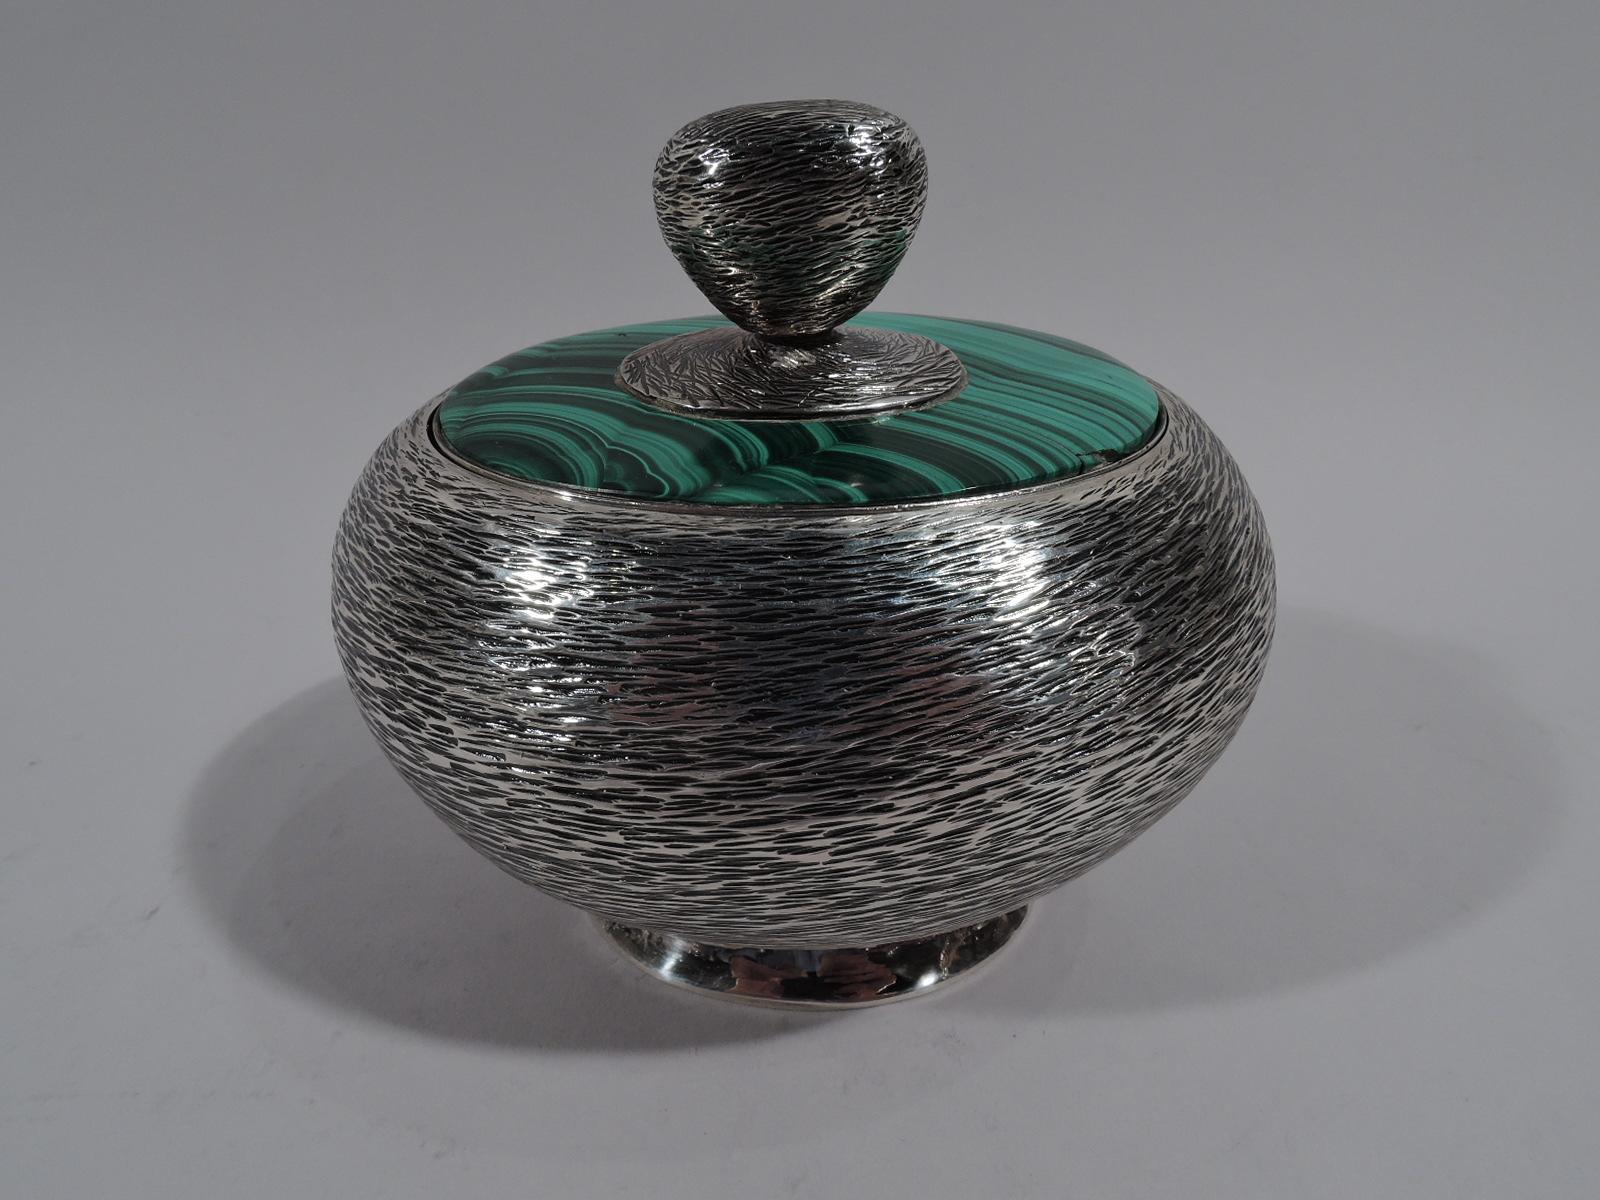 Modern sterling silver and malachite box. Made by William Seitz in New York, circa 1970. Oval with plain spread foot. Thick and tapering finial on oval ground mounted to flush malachite surround. Silver has dense and irregular striation. Interior